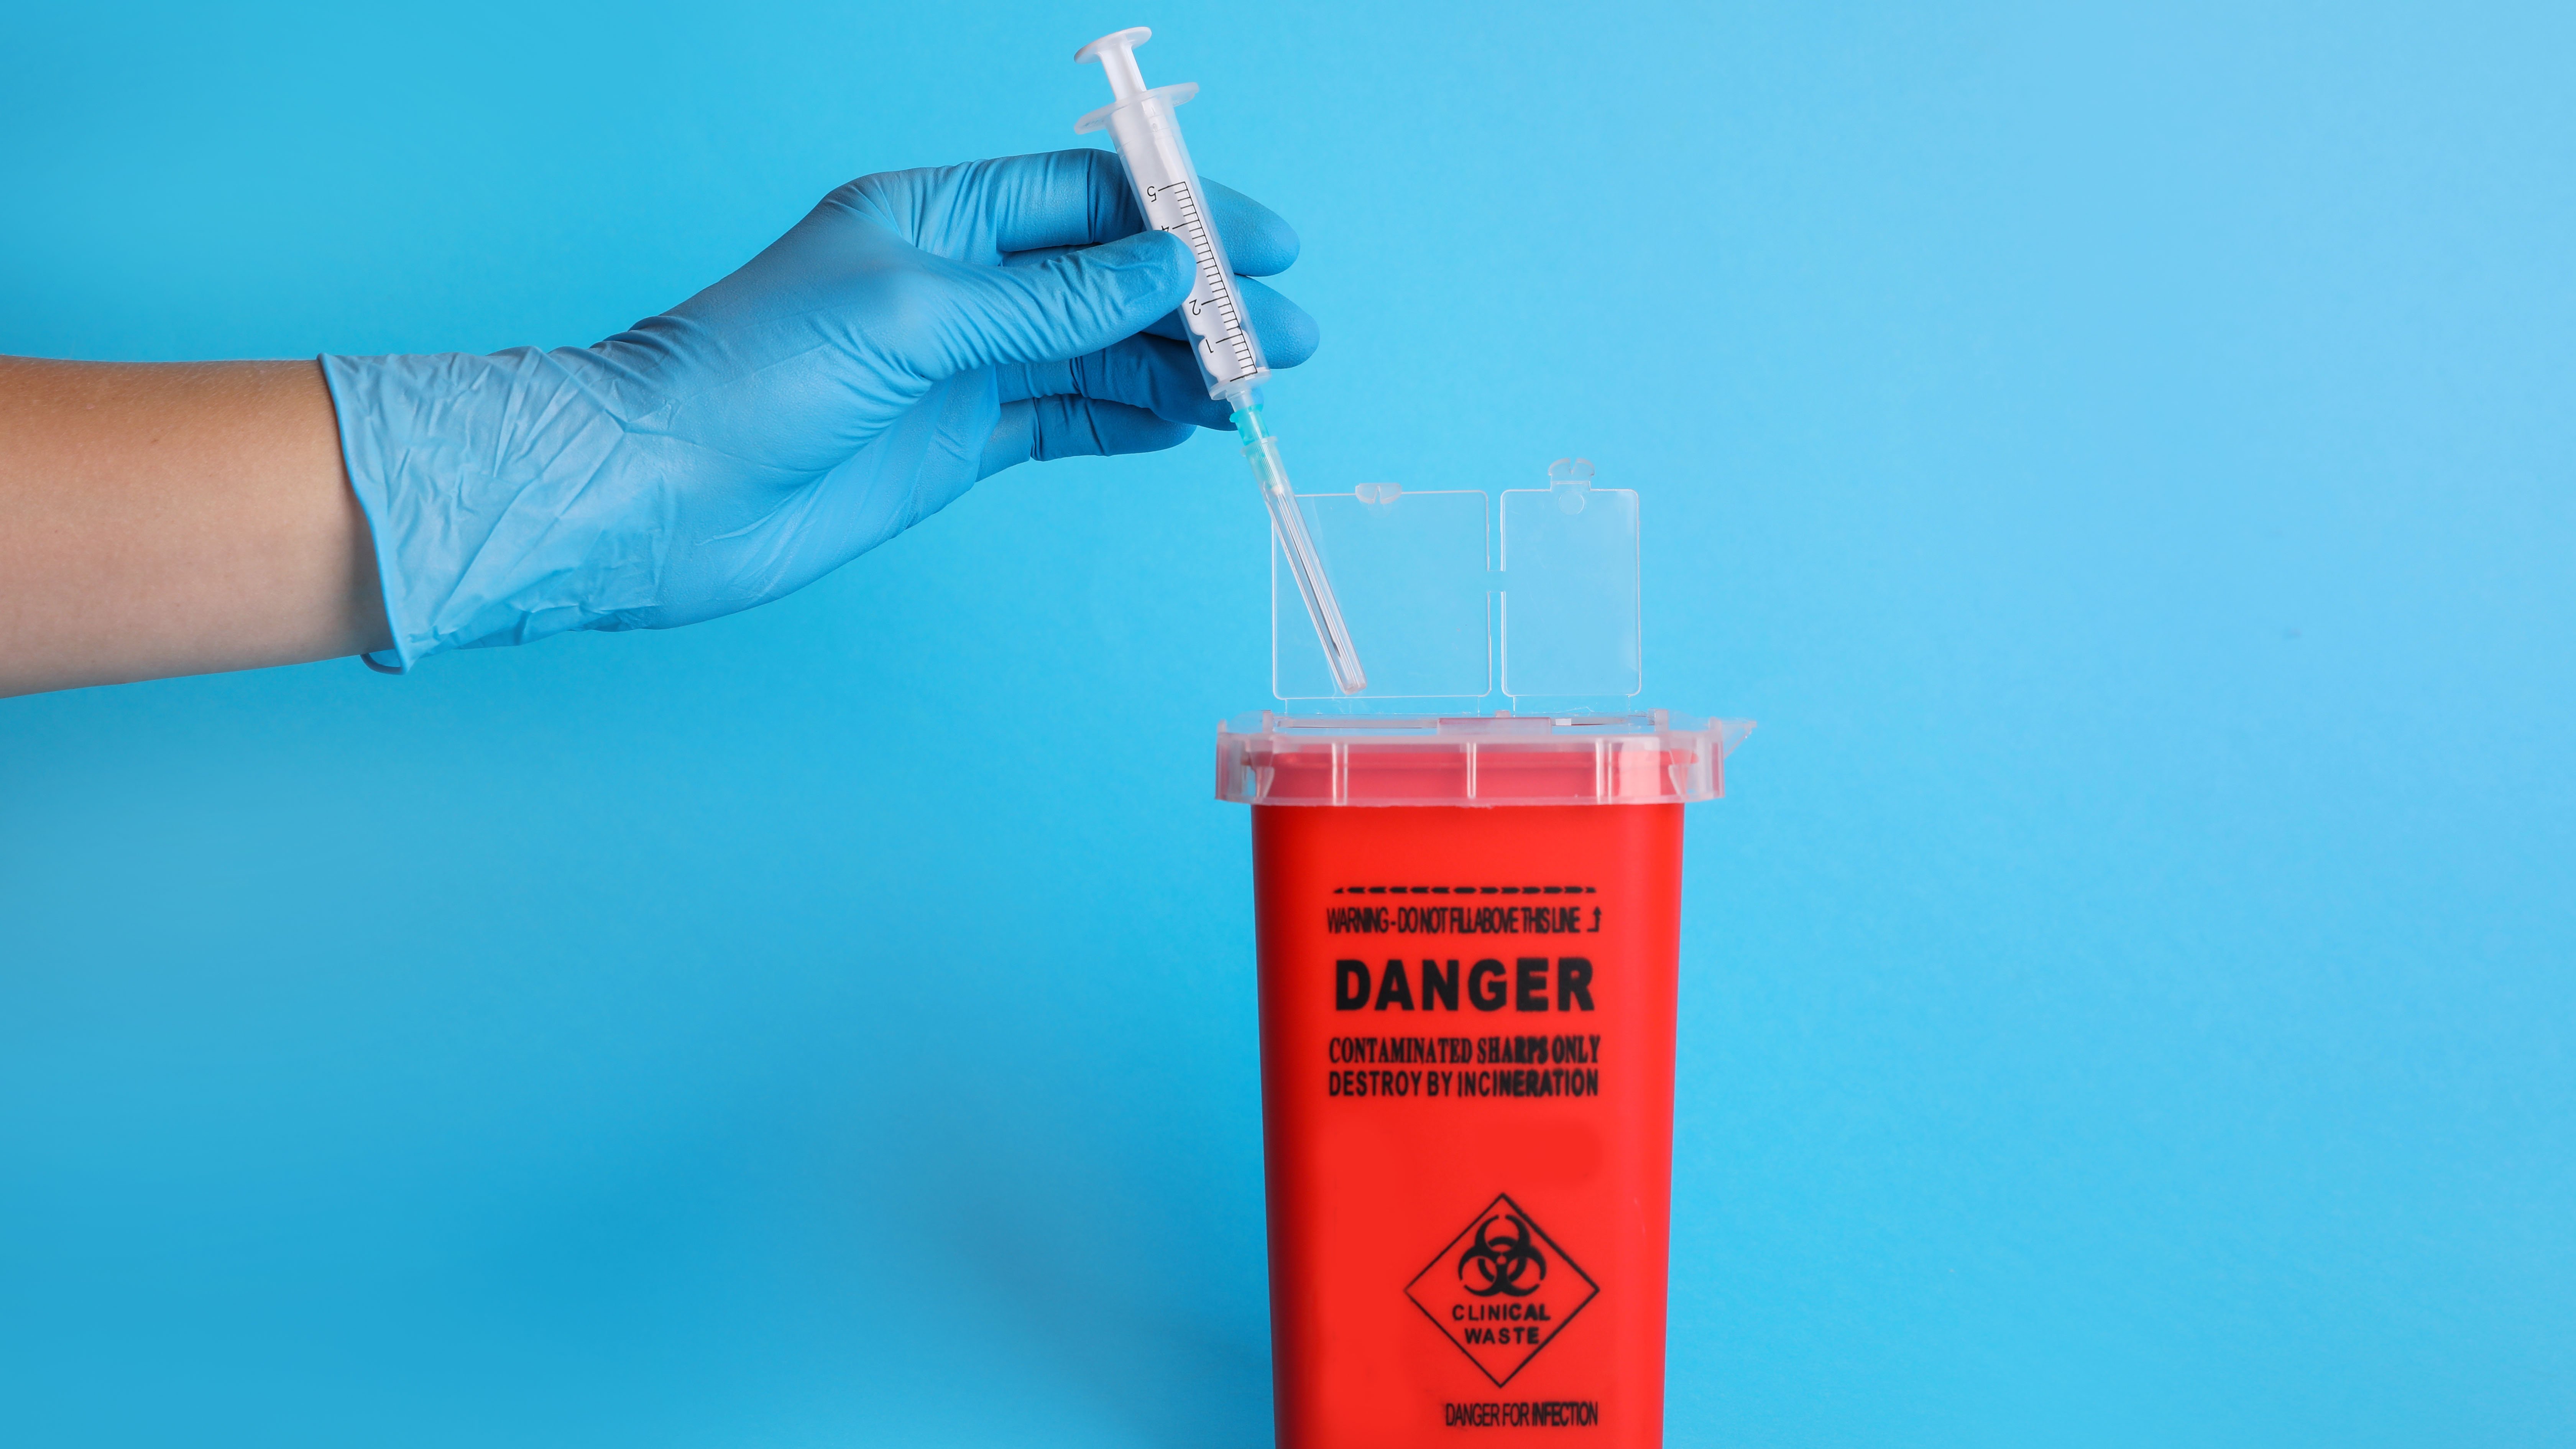 sharps container vaccines needles syringe dispose garbage